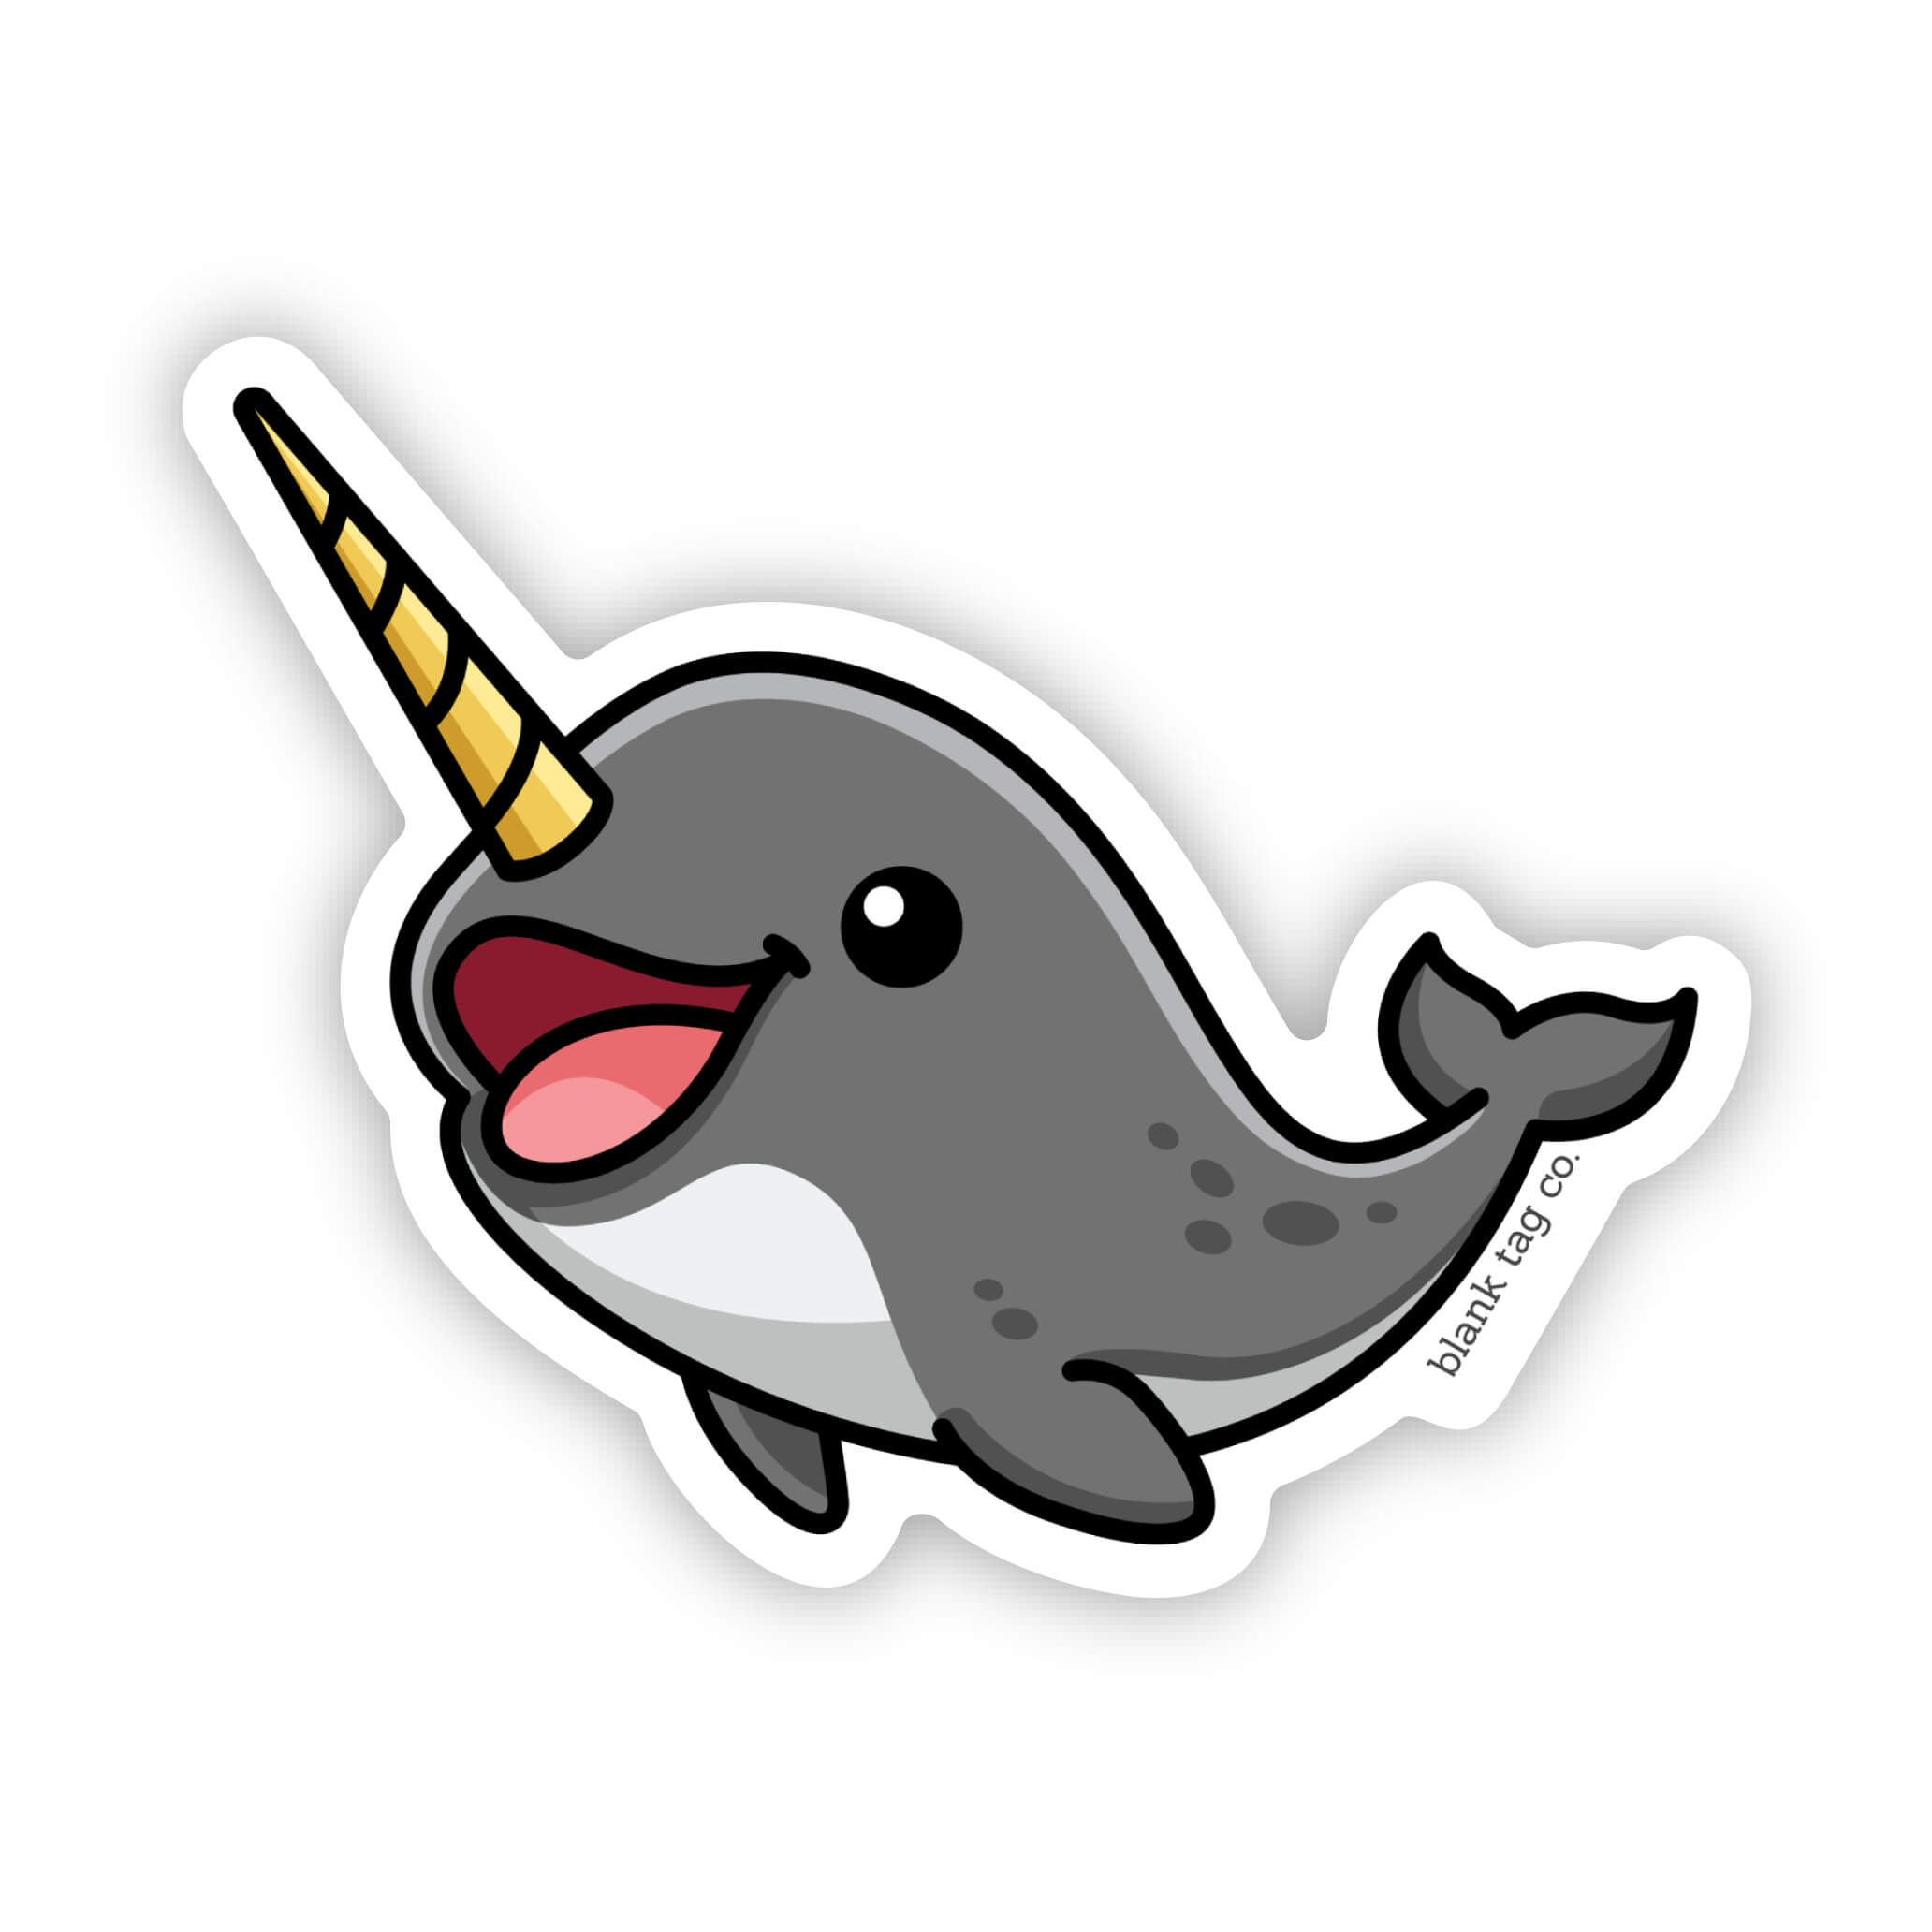 The Narwhal Sticker